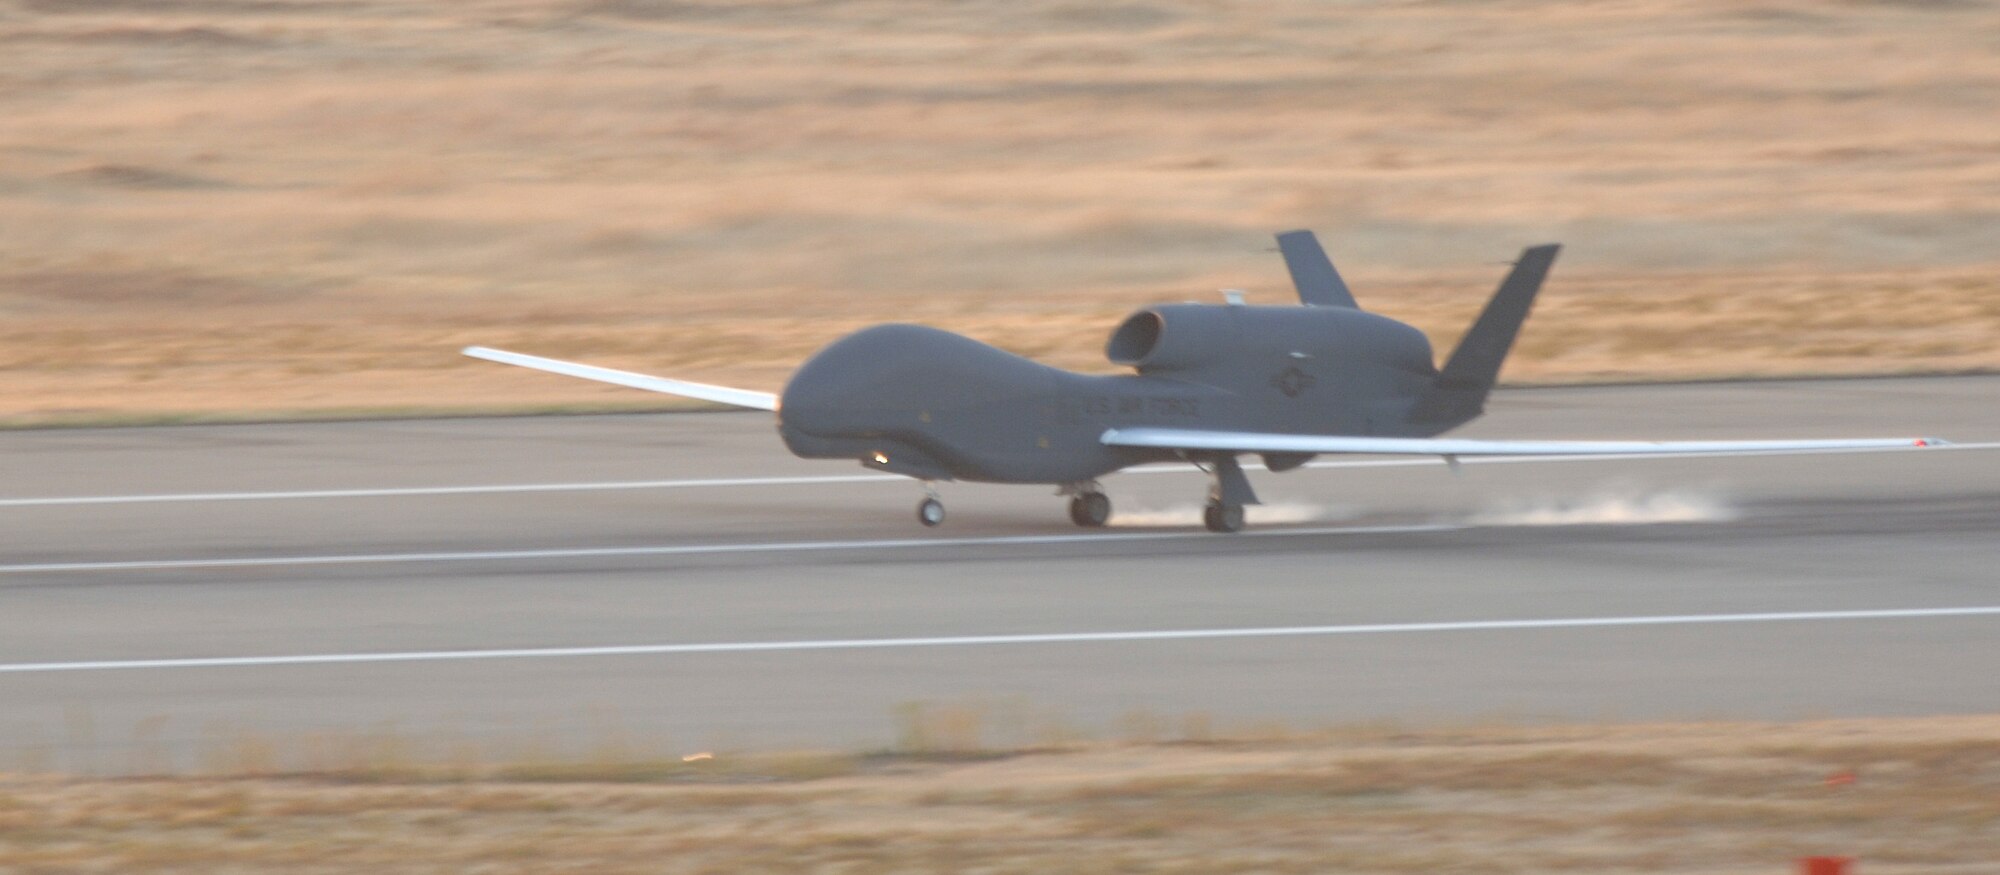 An RQ-4 Global Hawk lands at Beale Air Force Base, Calif., after completing a sortie. The unmanned aircraft recently surpassed the 30,000 flying hour milestone. (Photo by John Schwab)